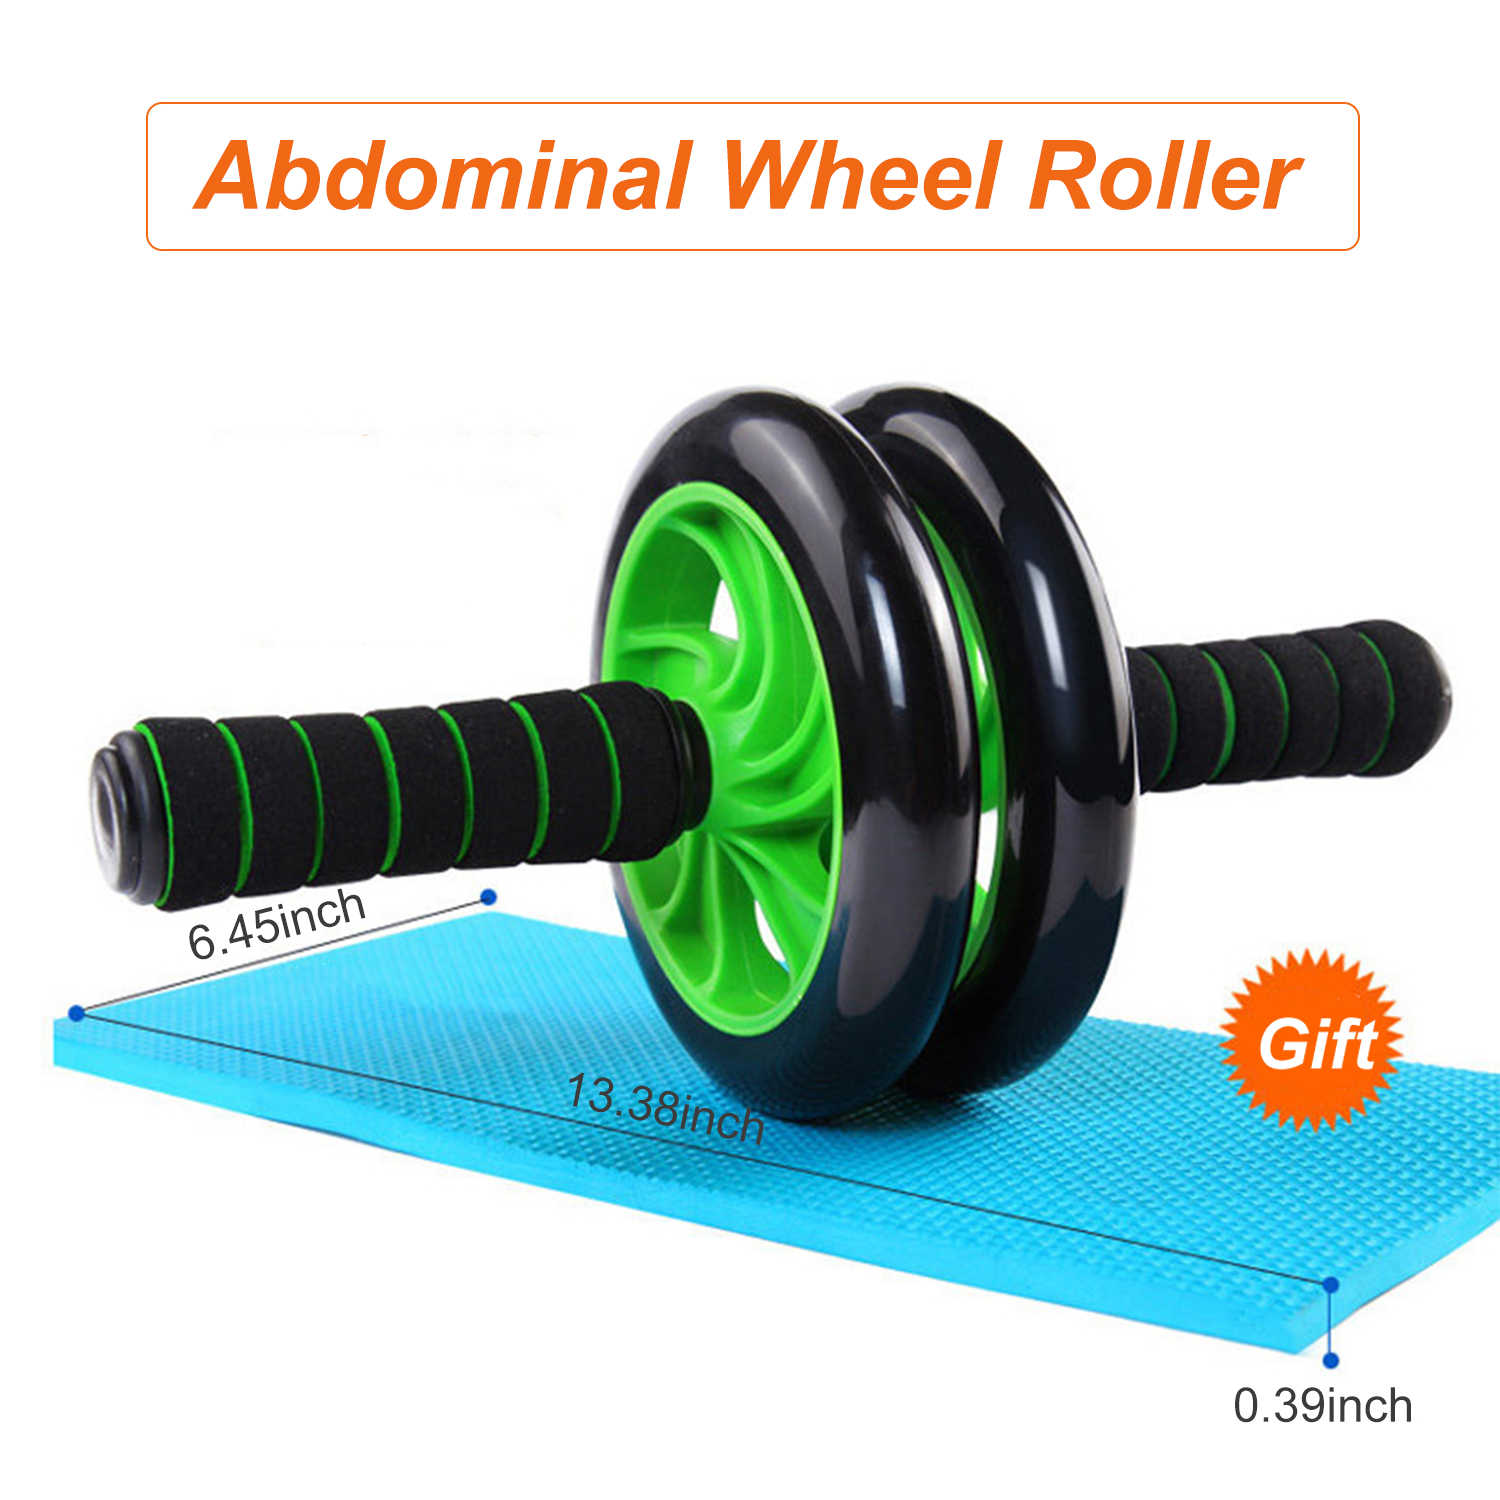 Decdeal - Double Wheel Roller with Knee Mat Waist Slimming Trainer for Home Gym Fitness Multifunctional Abdominal Exercise Equipment